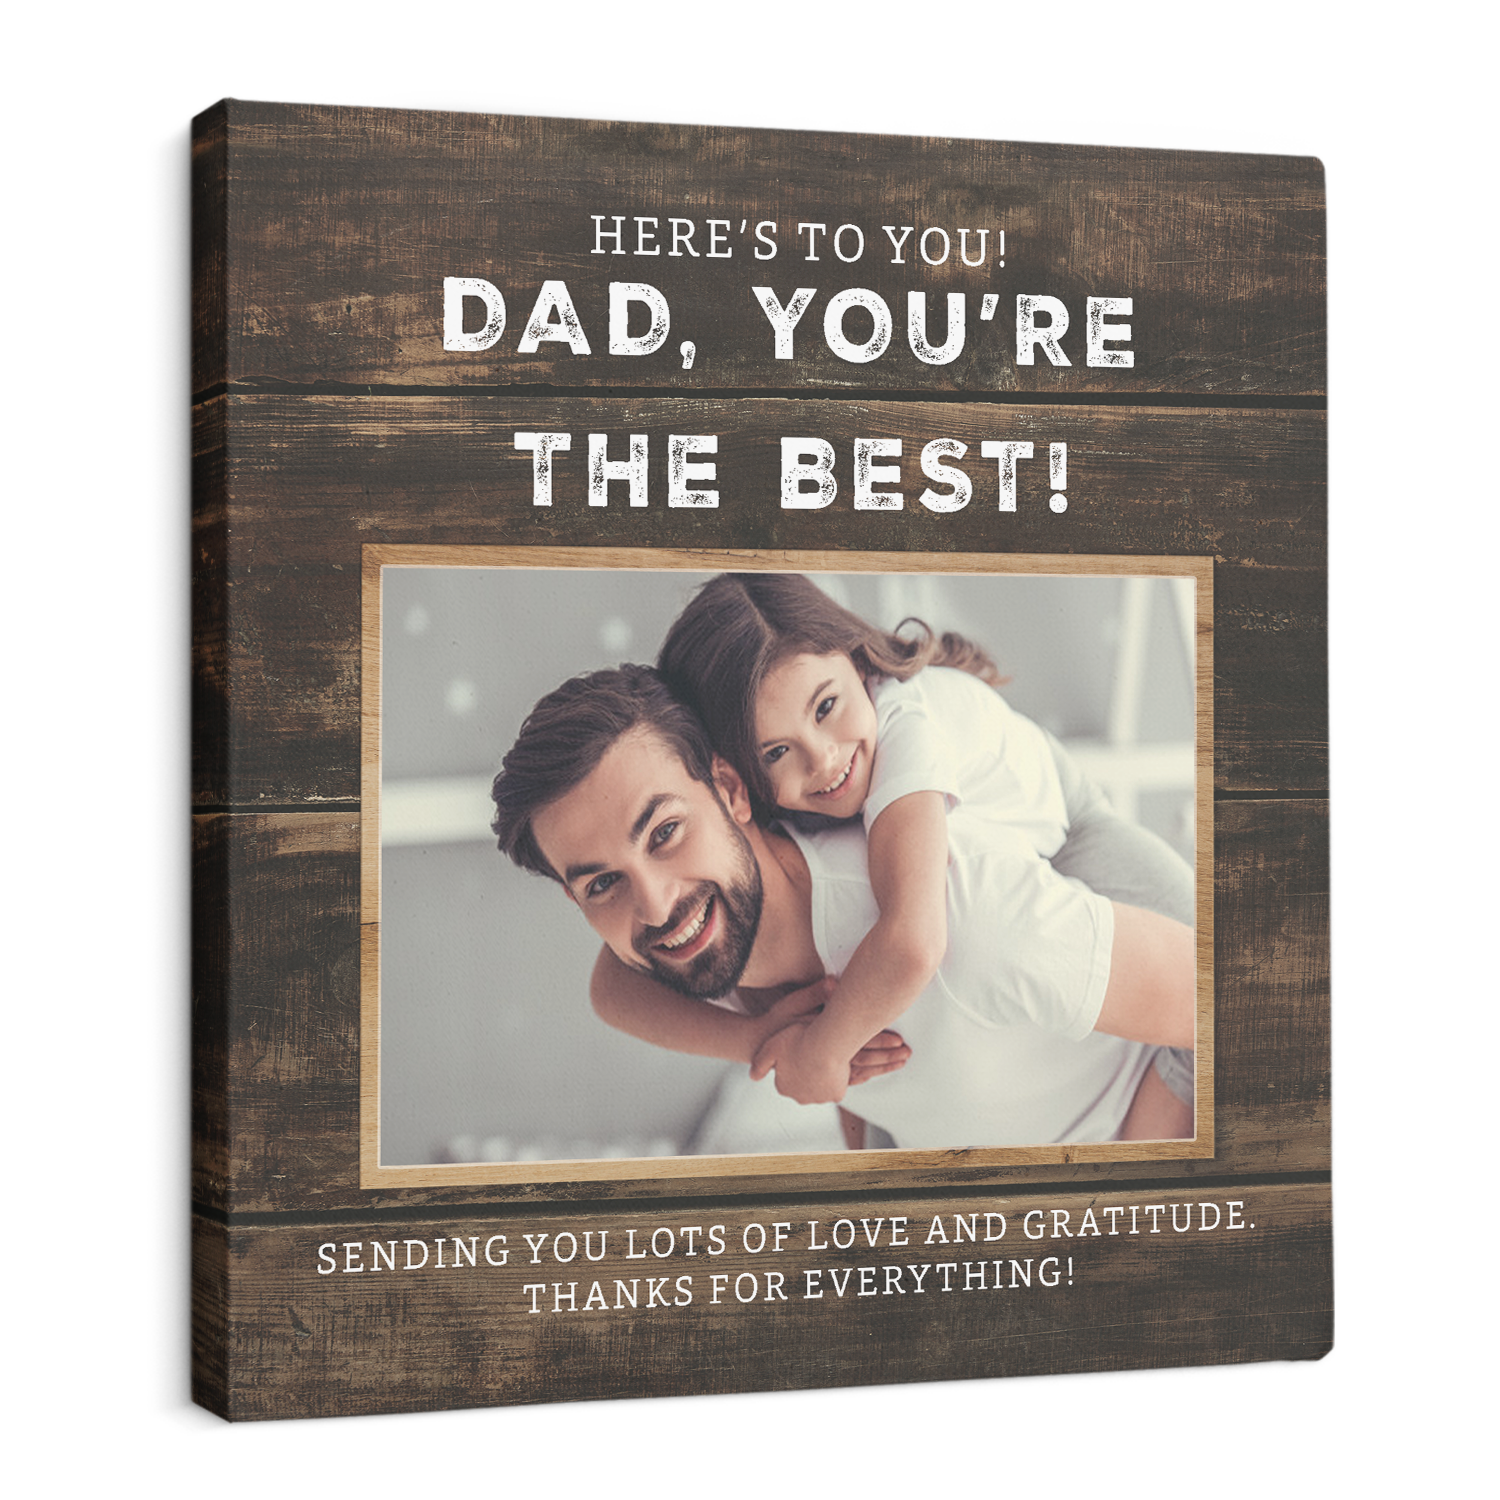 Dad, You're The Best, Custom Photo Canvas Wall Art